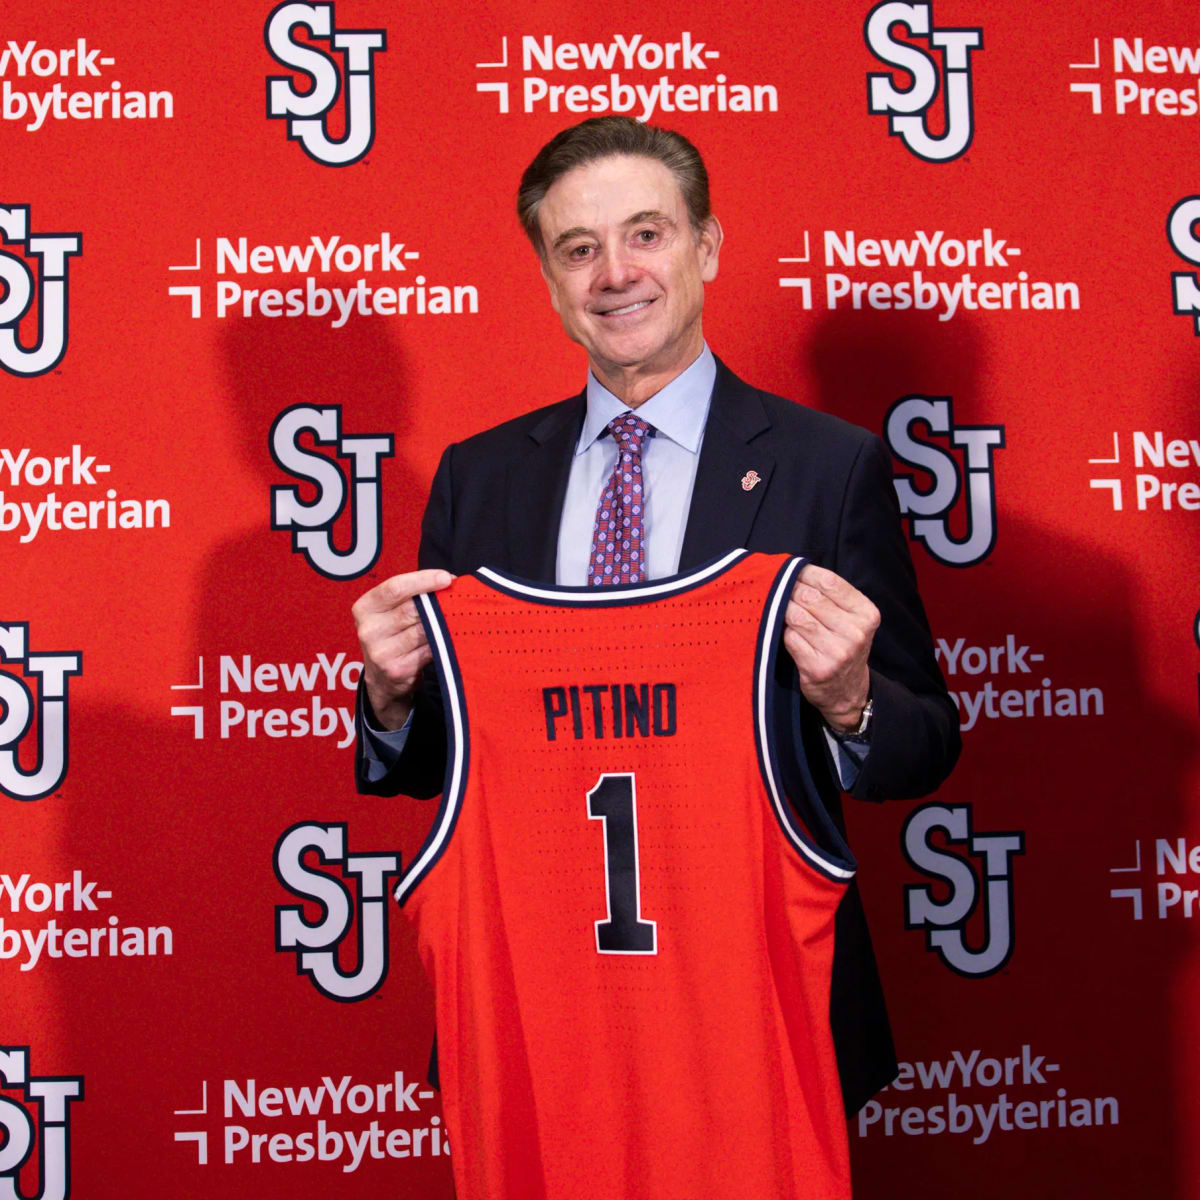 Rick Pitino, in NY state of mind at St John's, throws out first pitch  before Subway Series – NewsNation